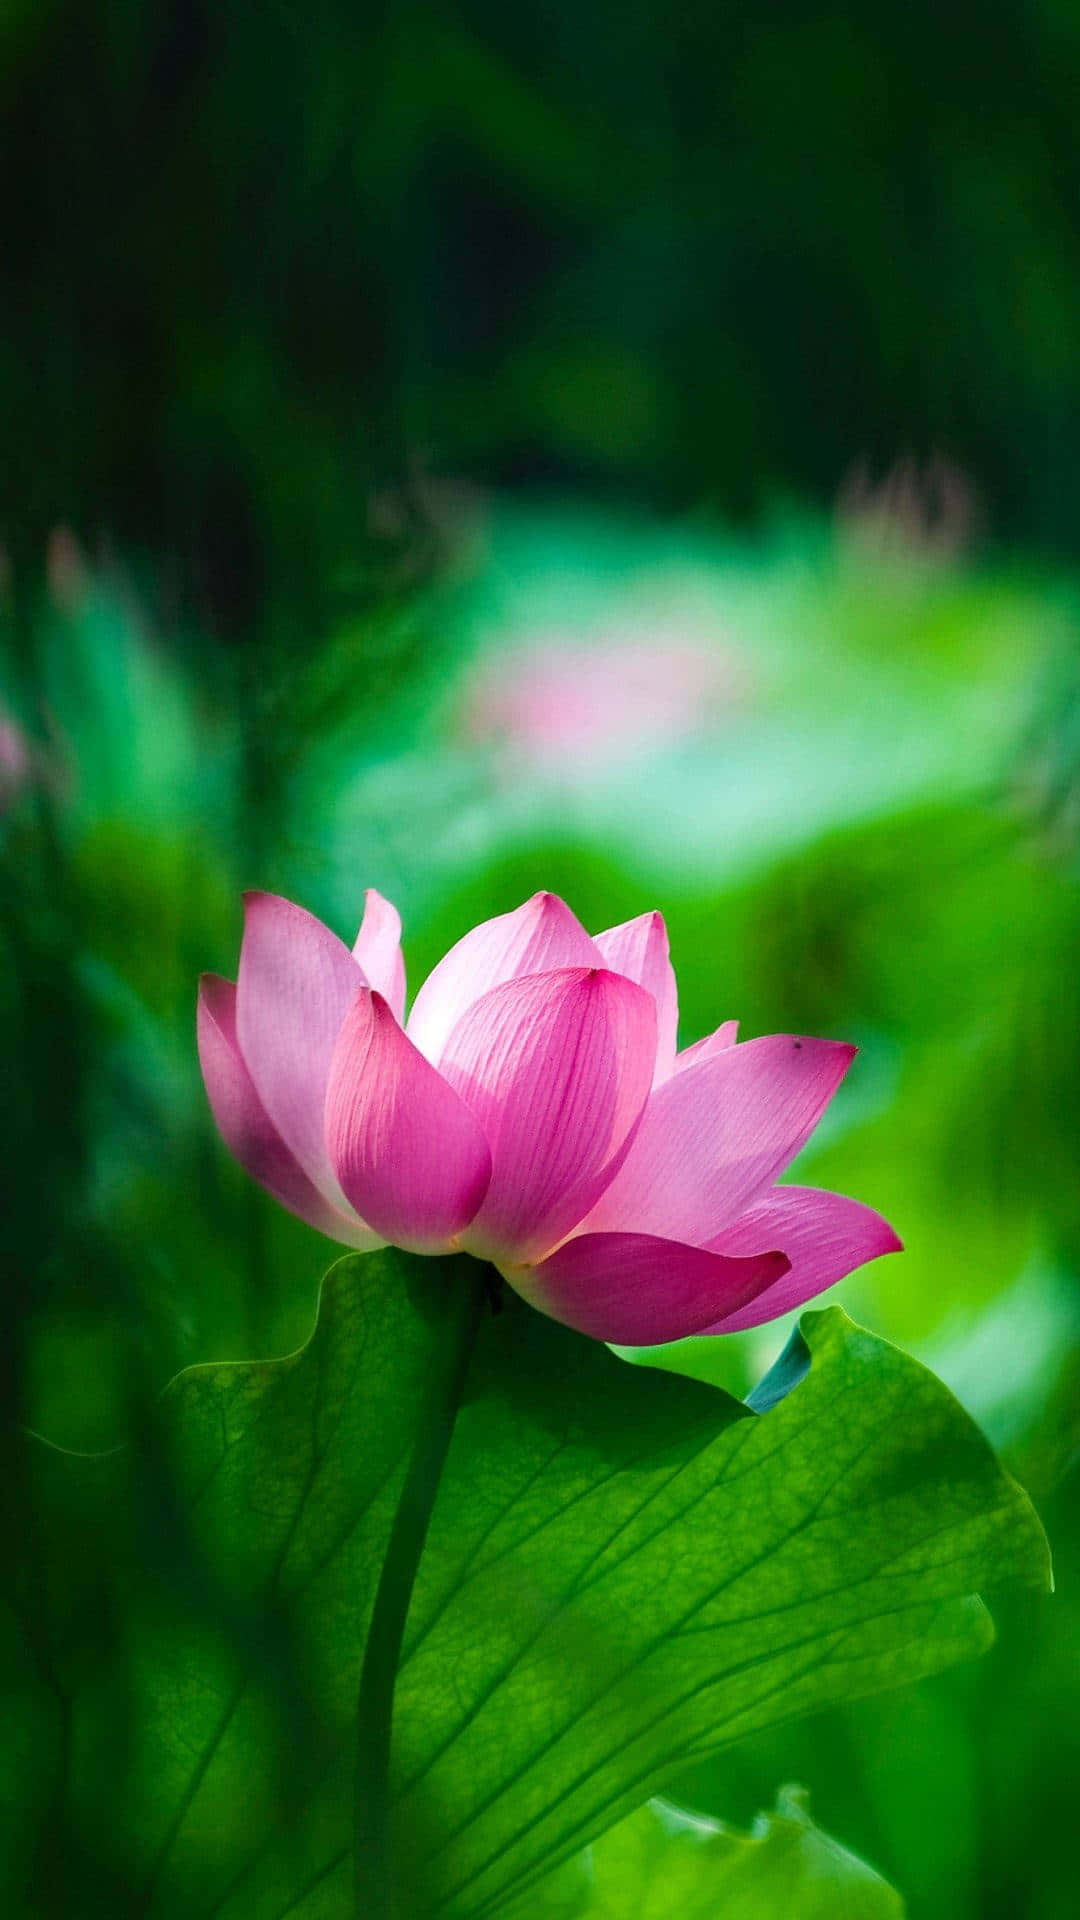 A beautiful lotus flower blooming in its natural environment